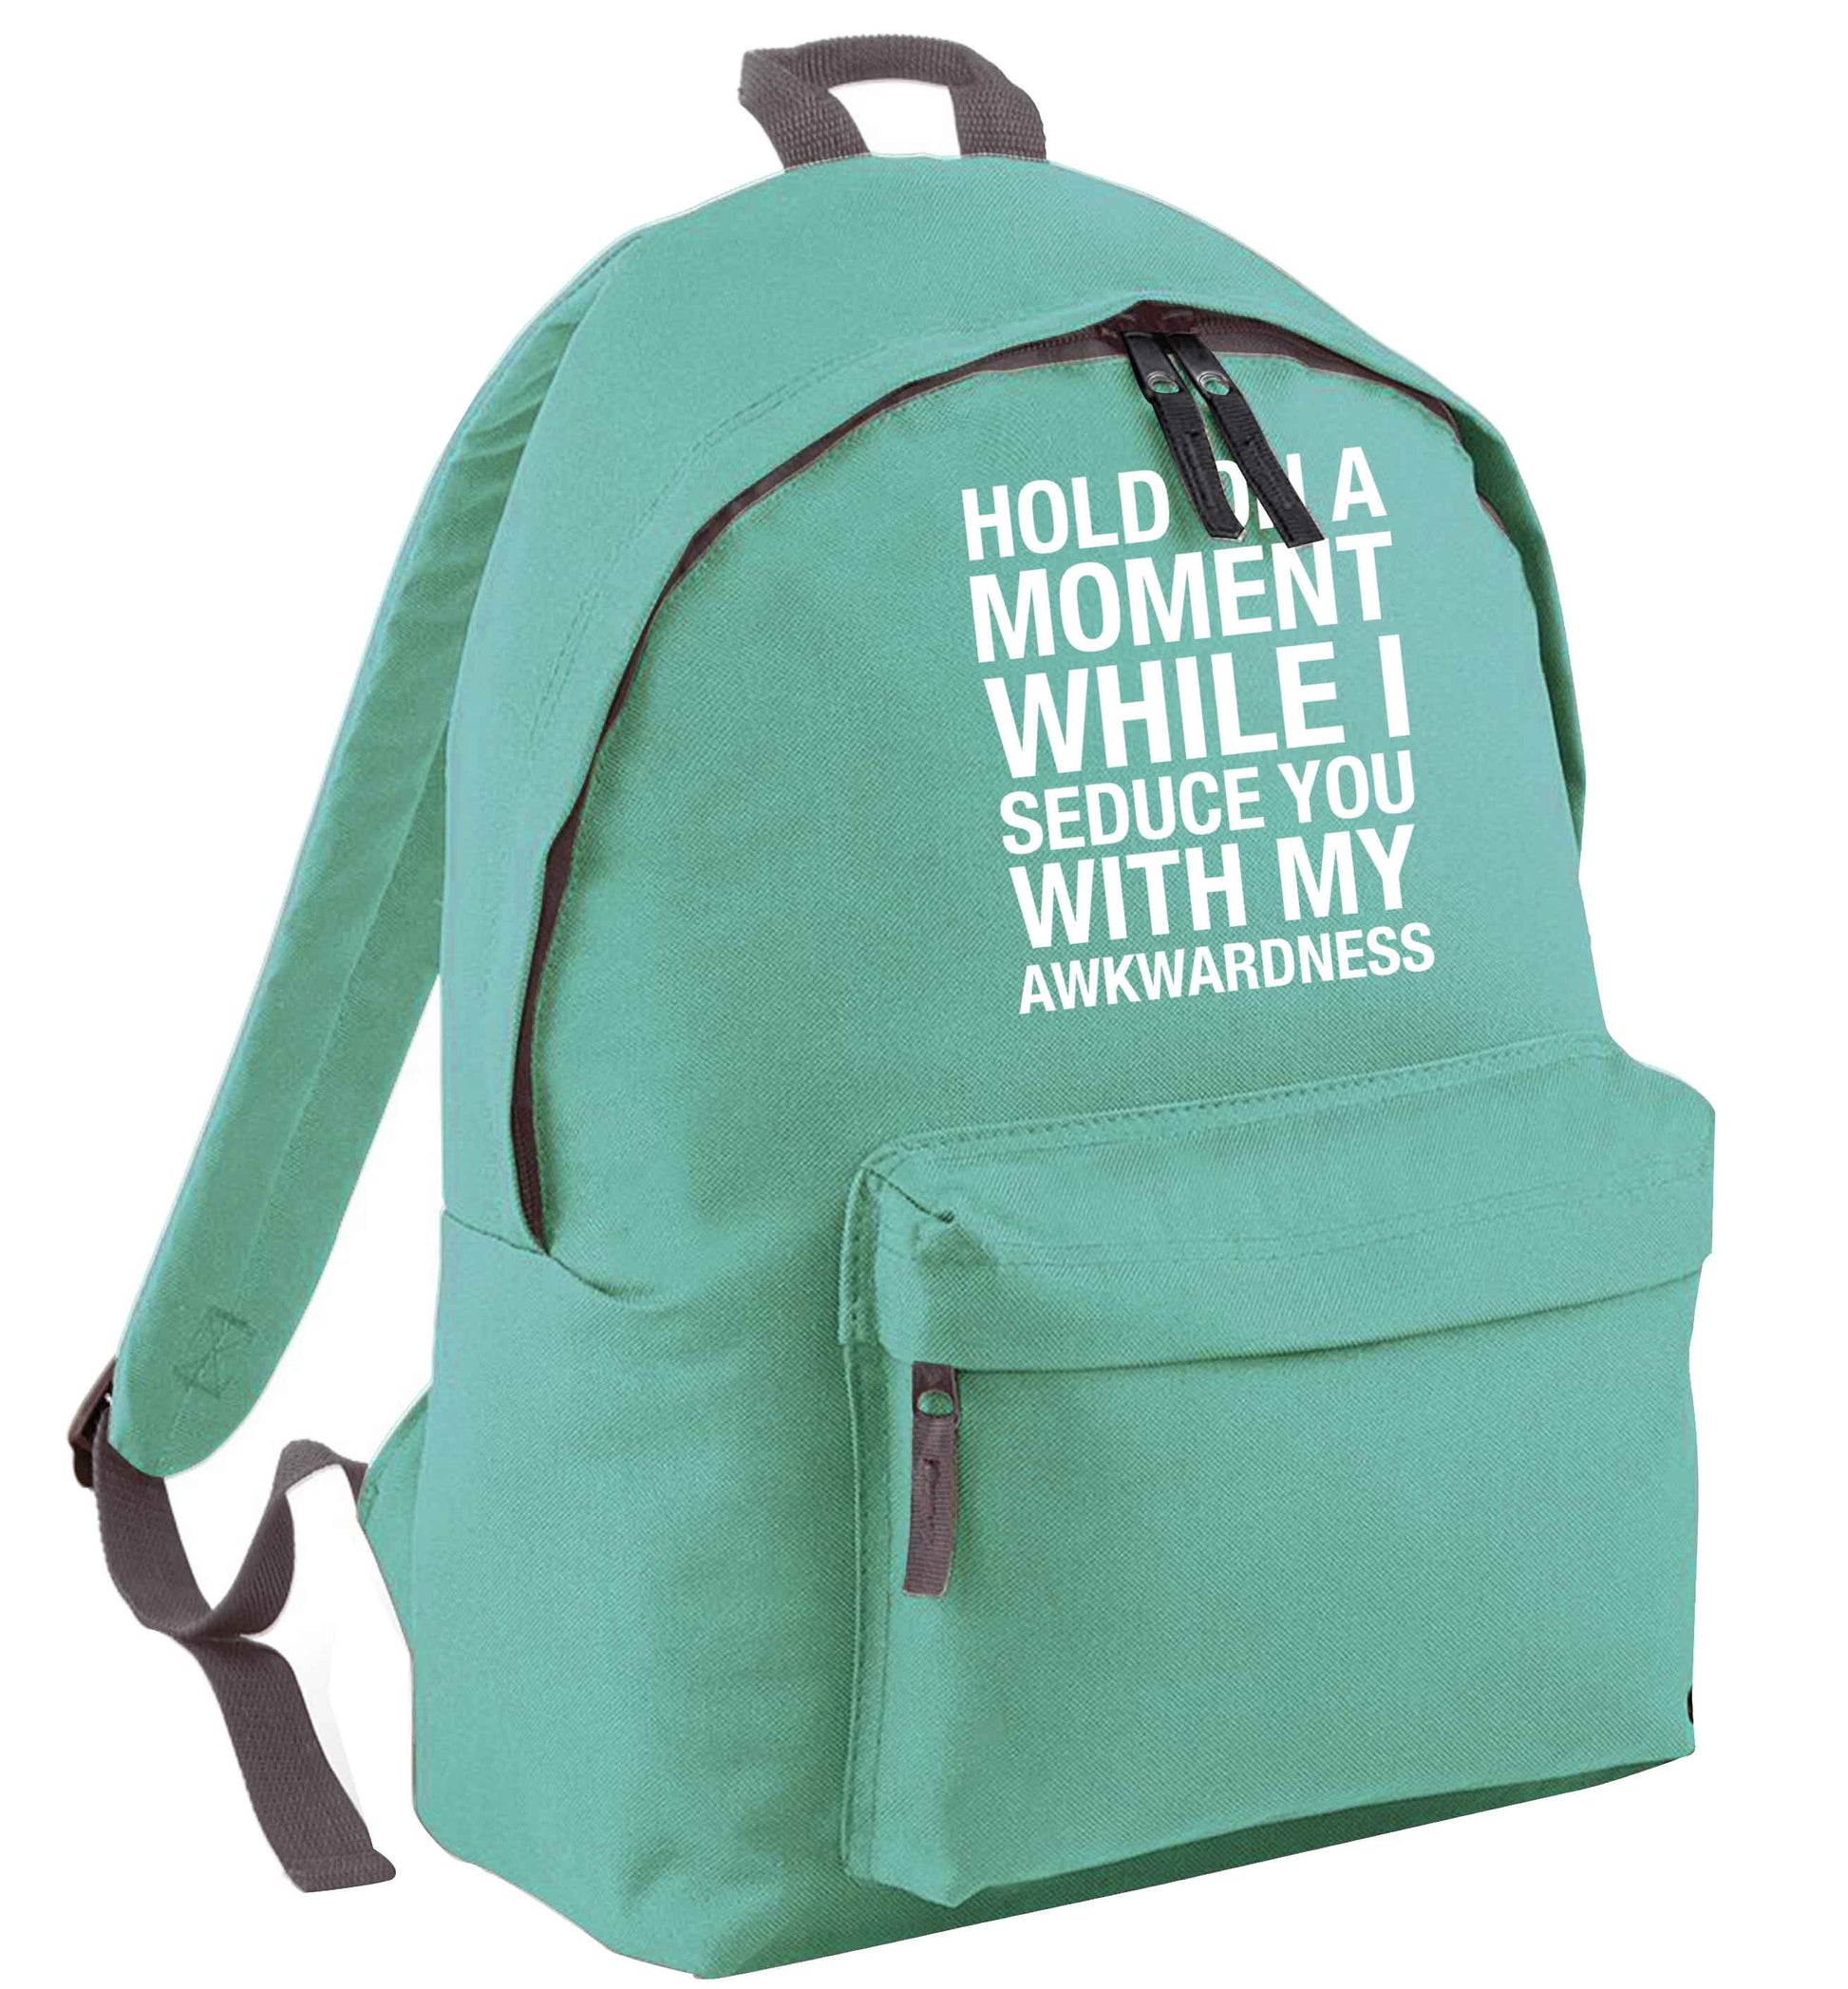 Hold on a moment while I seduce you with my awkwardness mint adults backpack